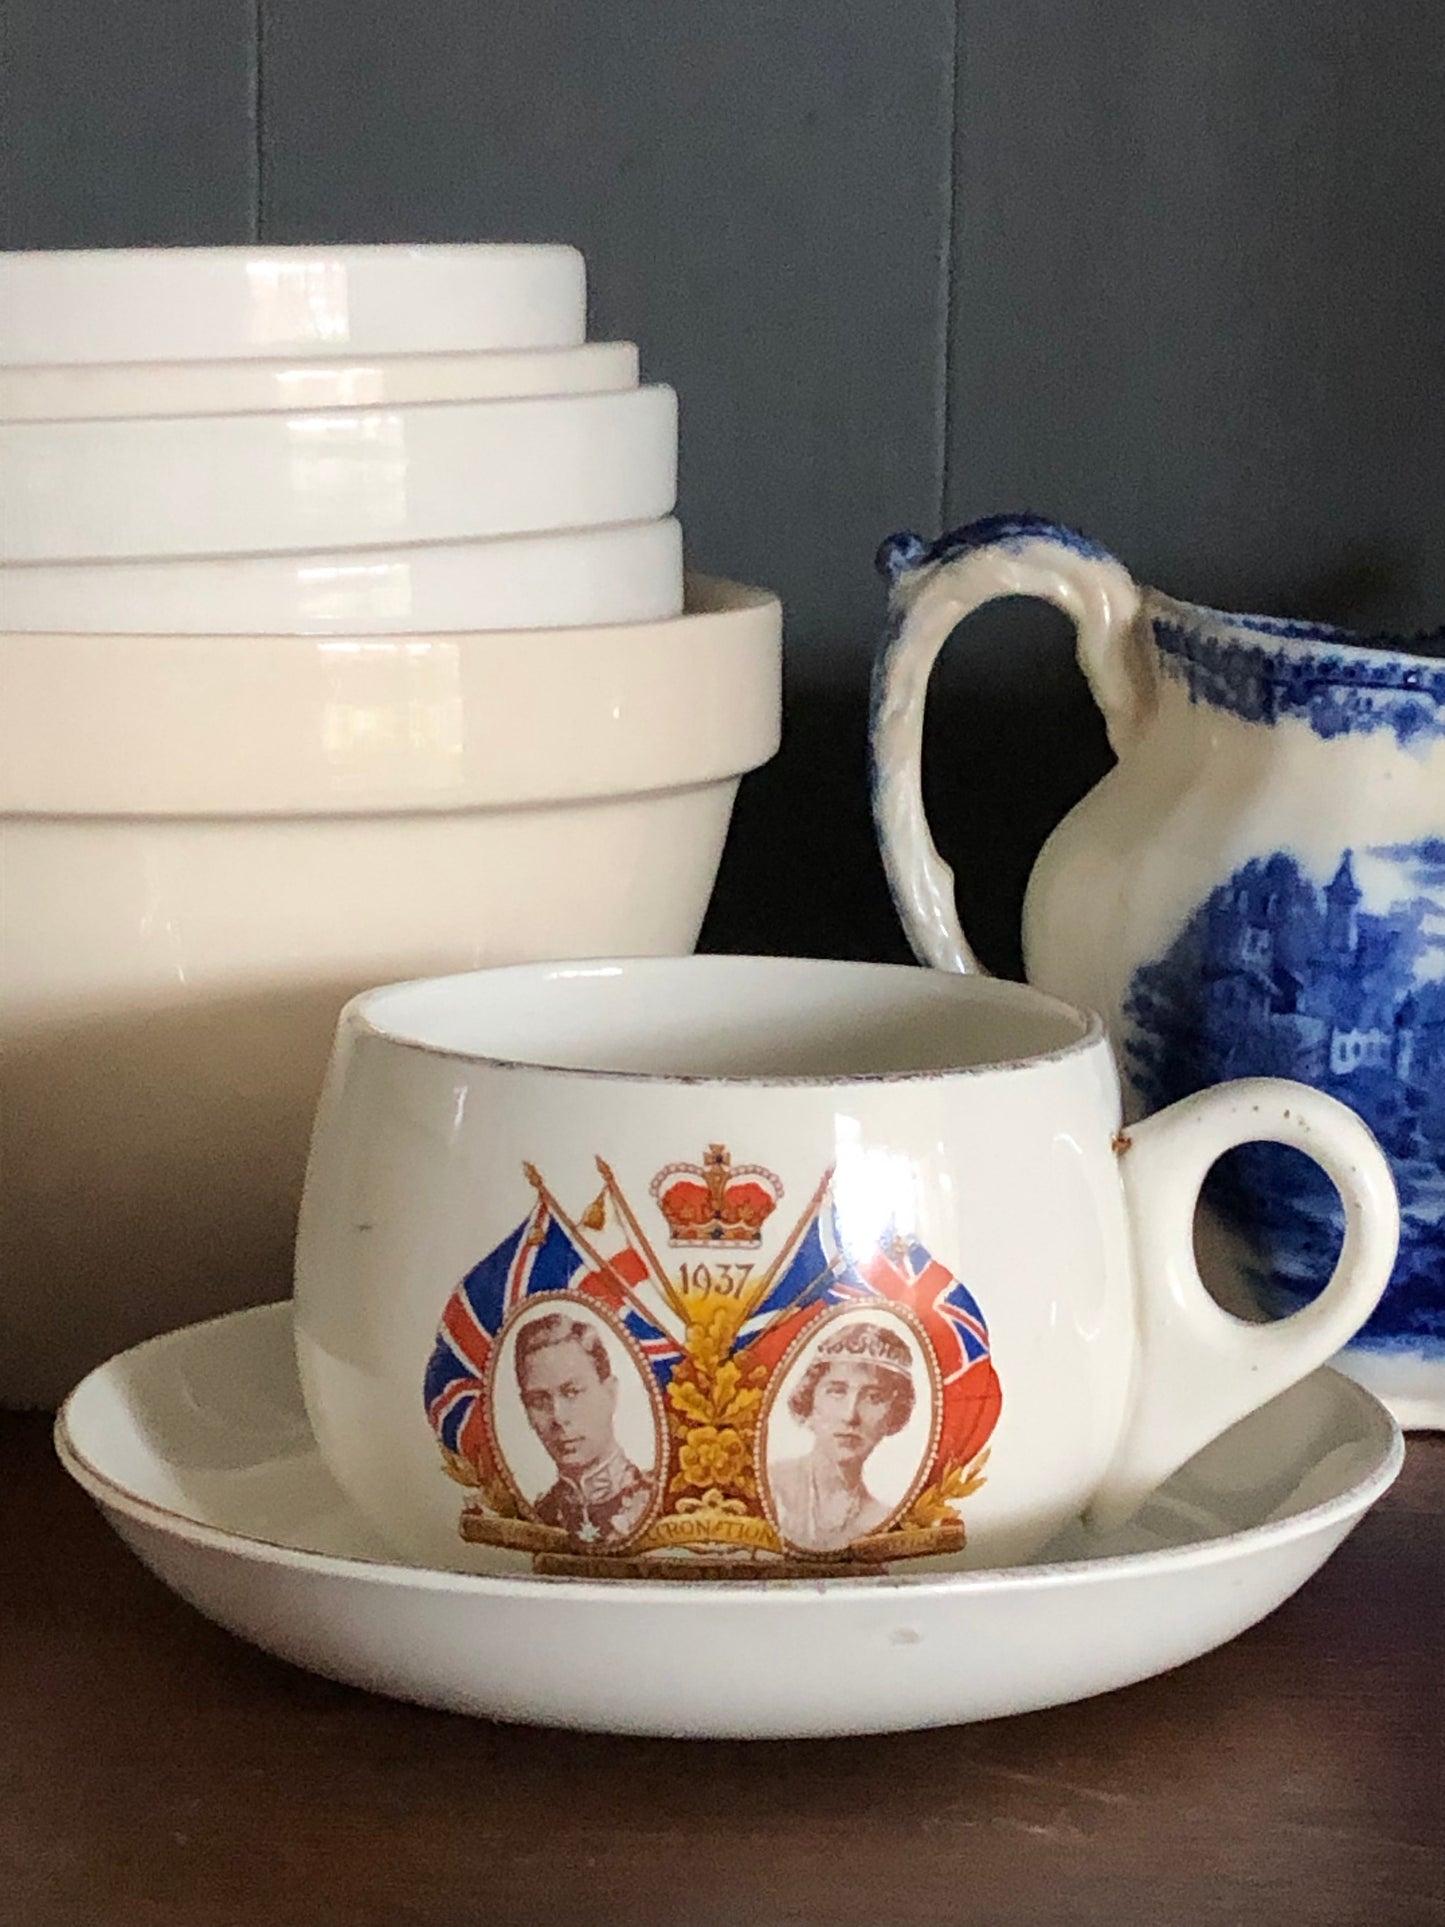 vintage Royal Coronation 1937 commemorative cup and saucer Hotel Ware by Alfred Meakin